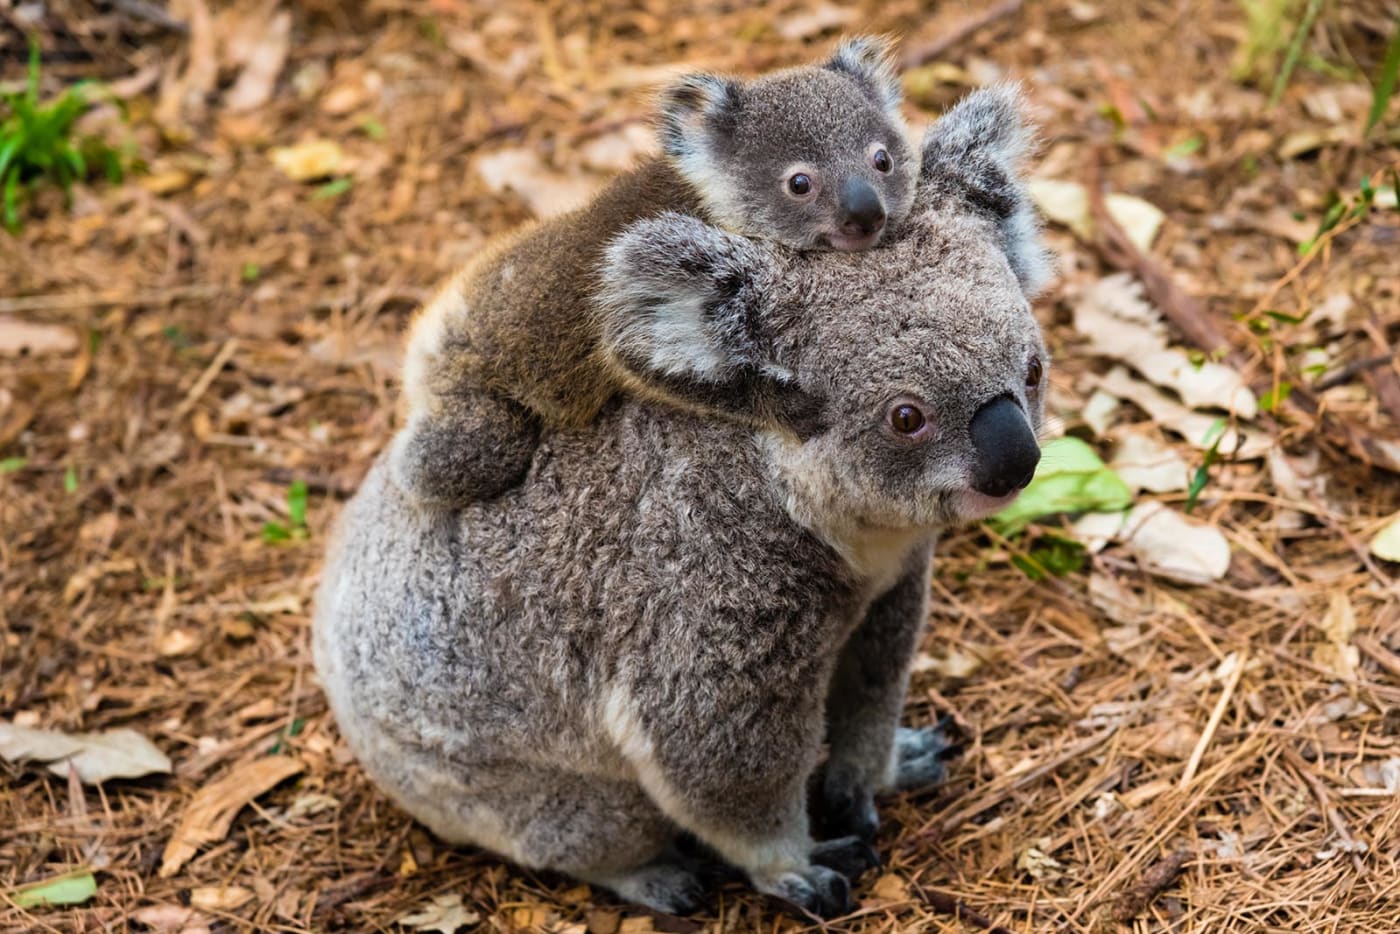 Koala mother with a joey on her back sits on the ground.